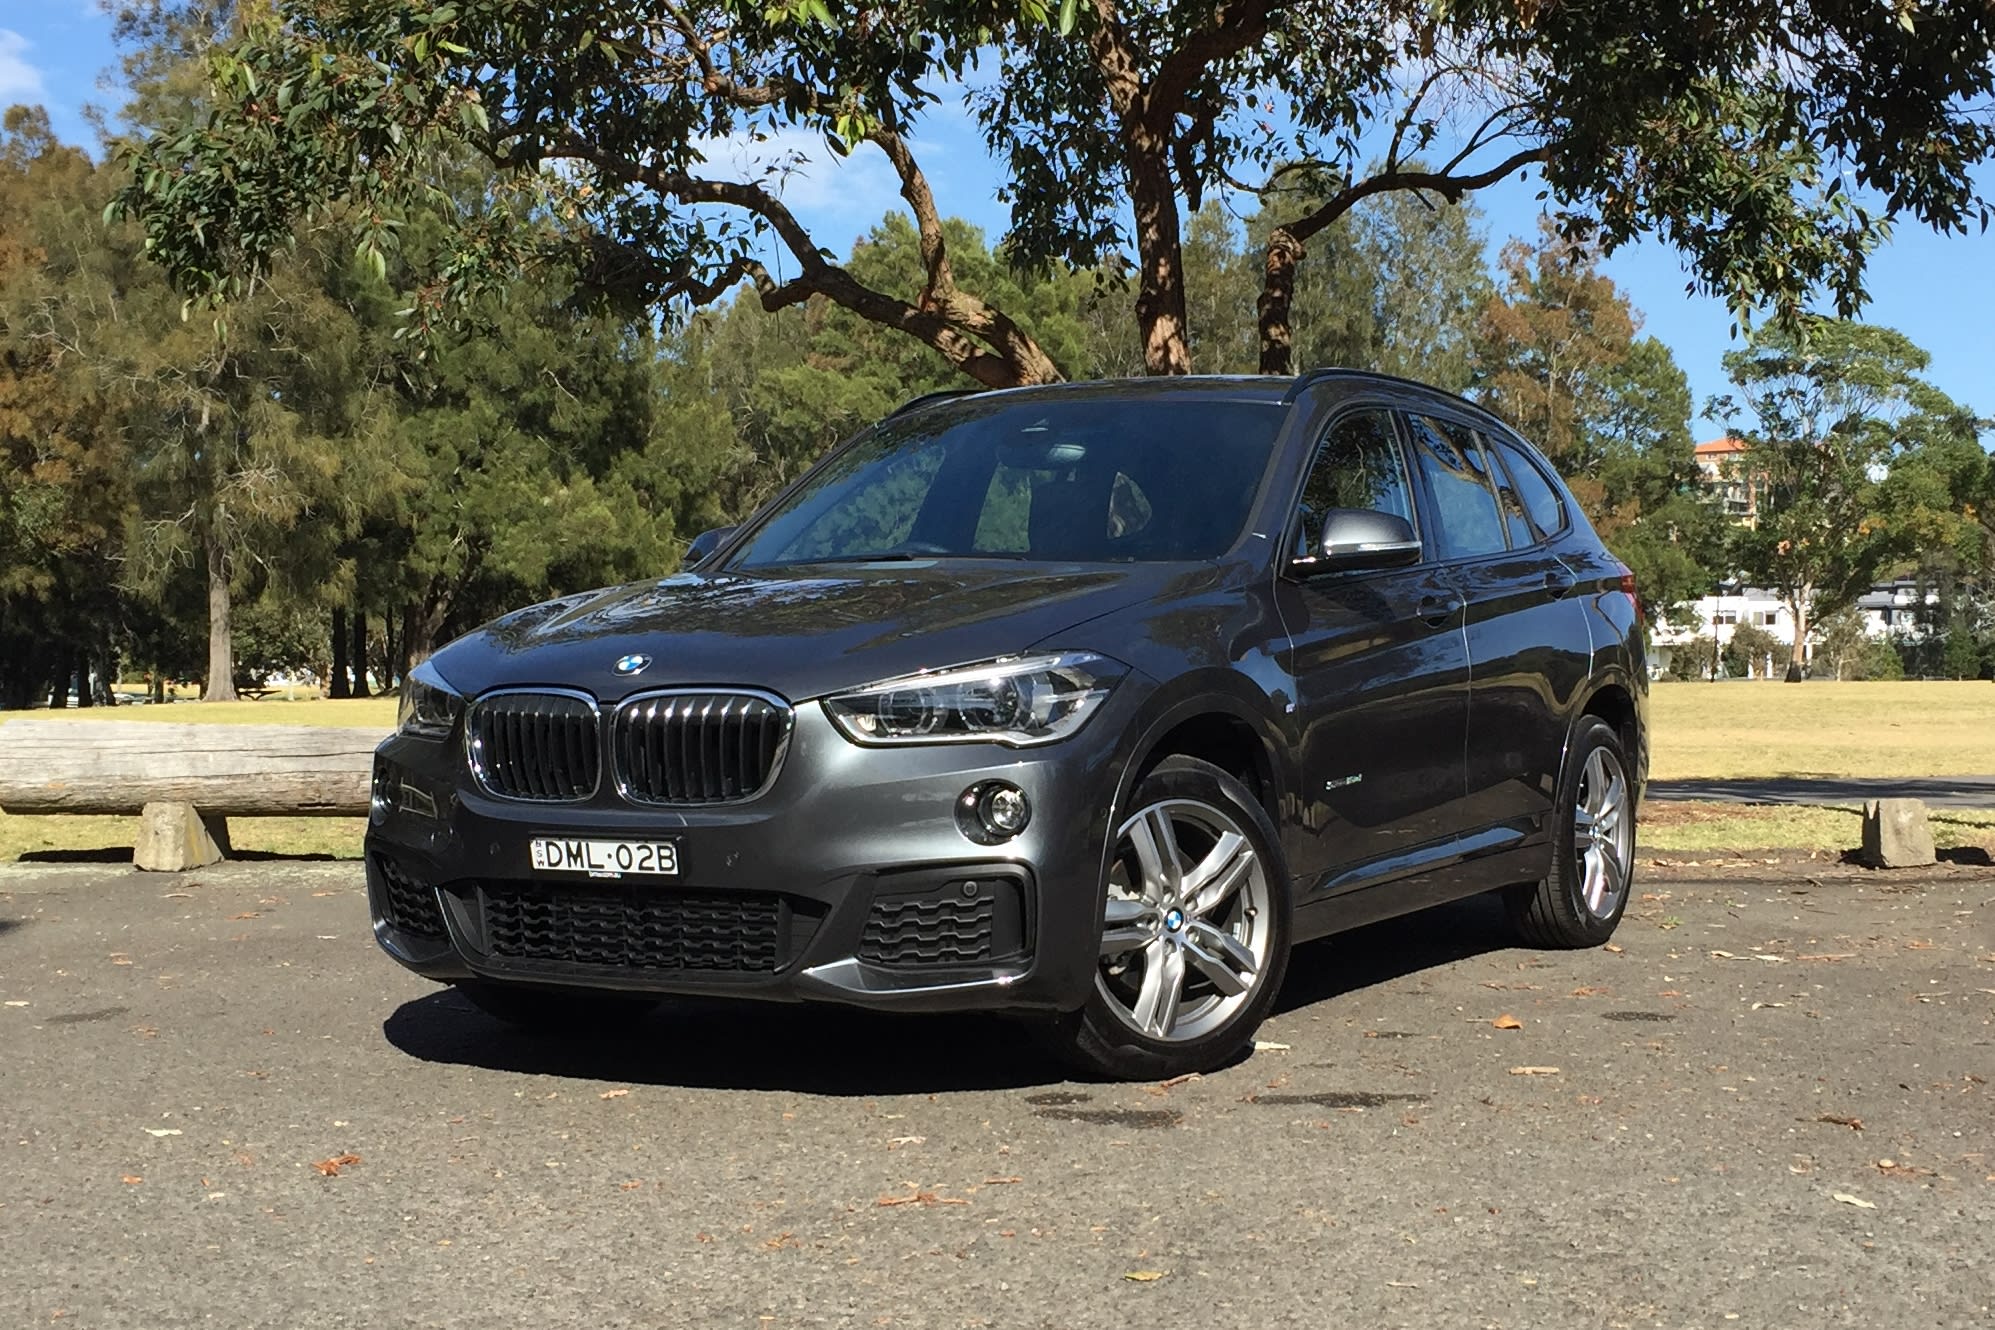 BMW X1 2017 review: sDrive18d | CarsGuide